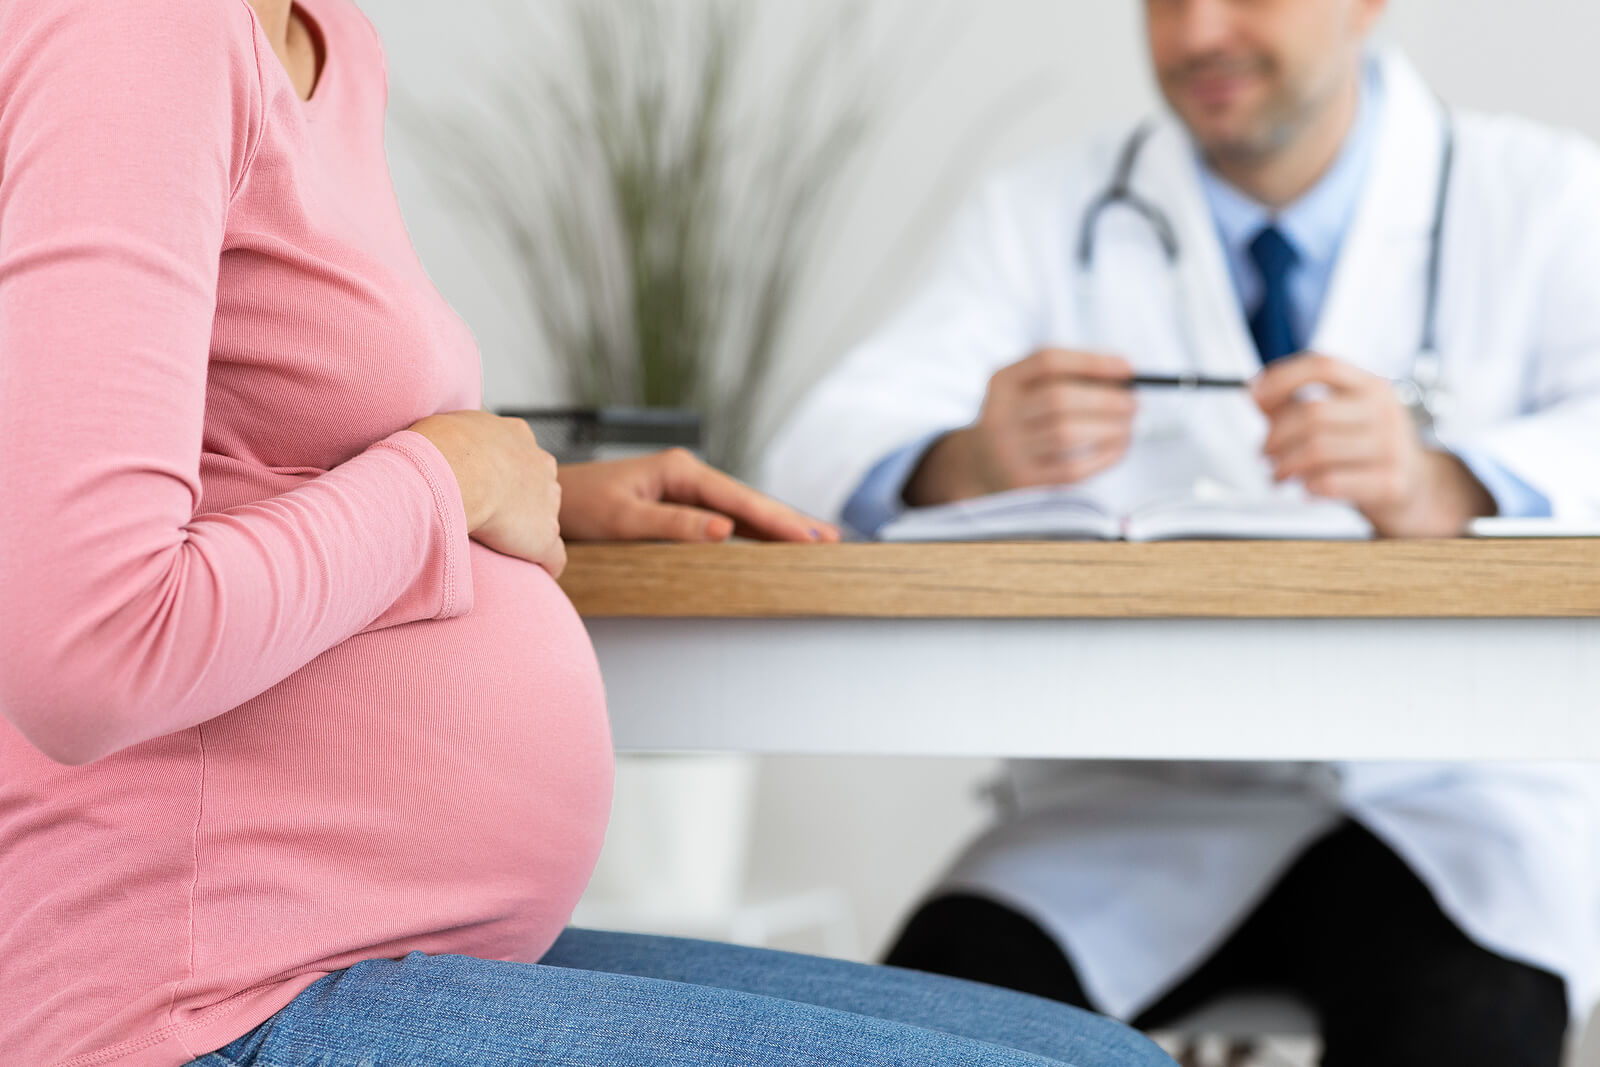 Medical tests during pregnancy include special tests